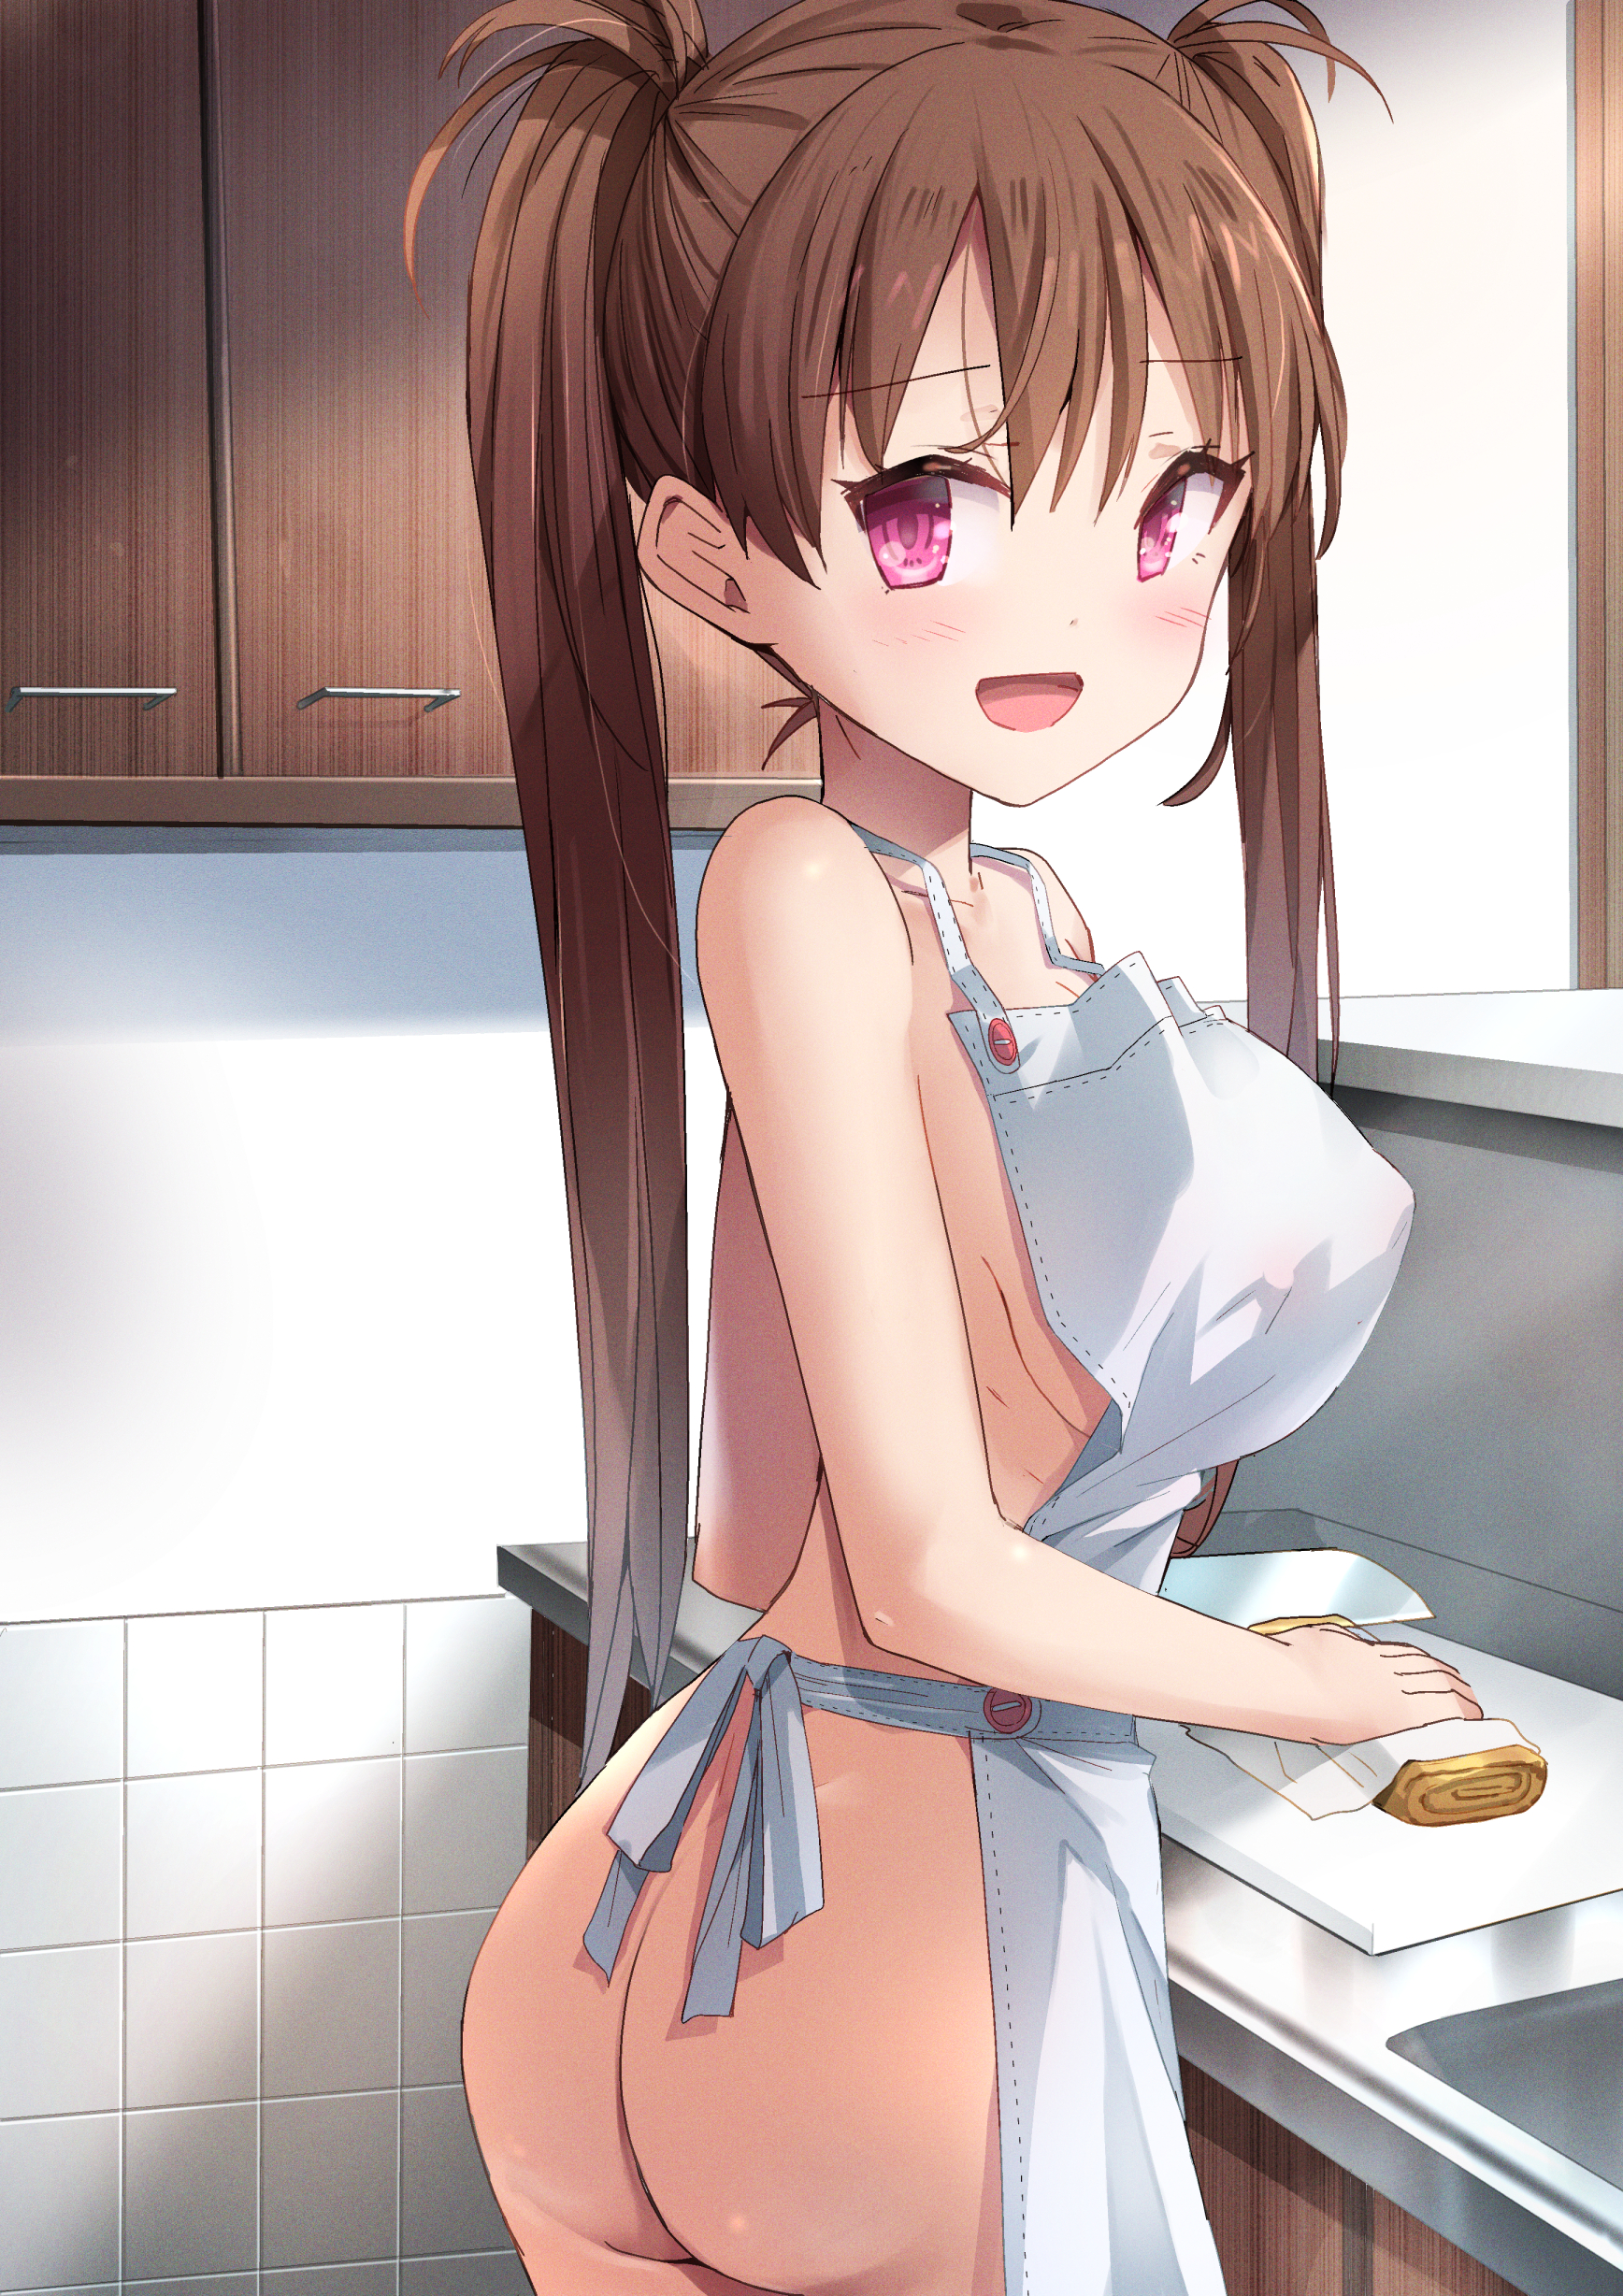 Naked Apron Twintailed Cutie [Original] Sex Images Hq